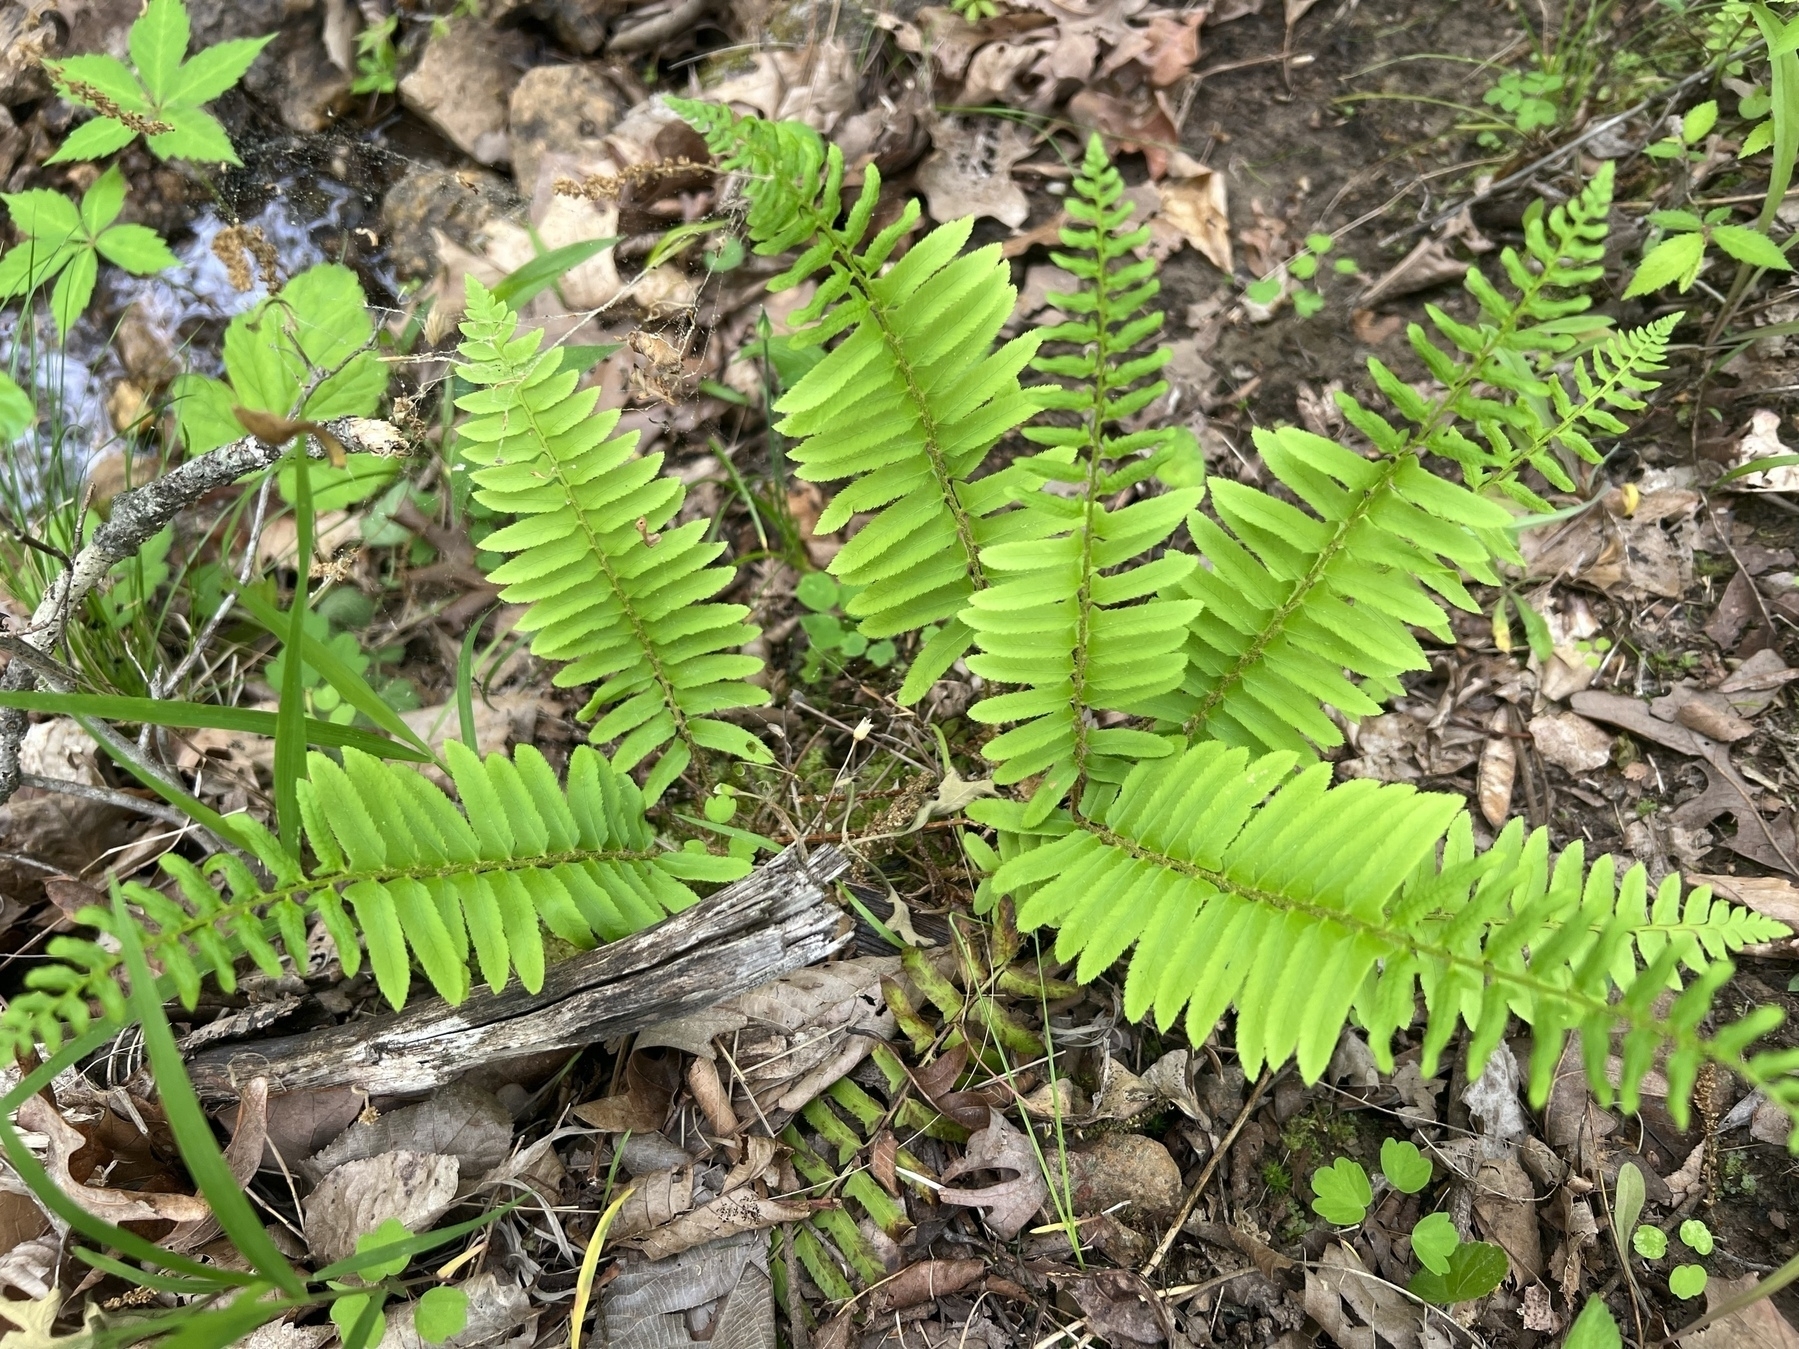 A green fern photographed from above. The plant consists of six stems of leaves and the ground around it is a mix of decomposing leaves, soil, sticks.